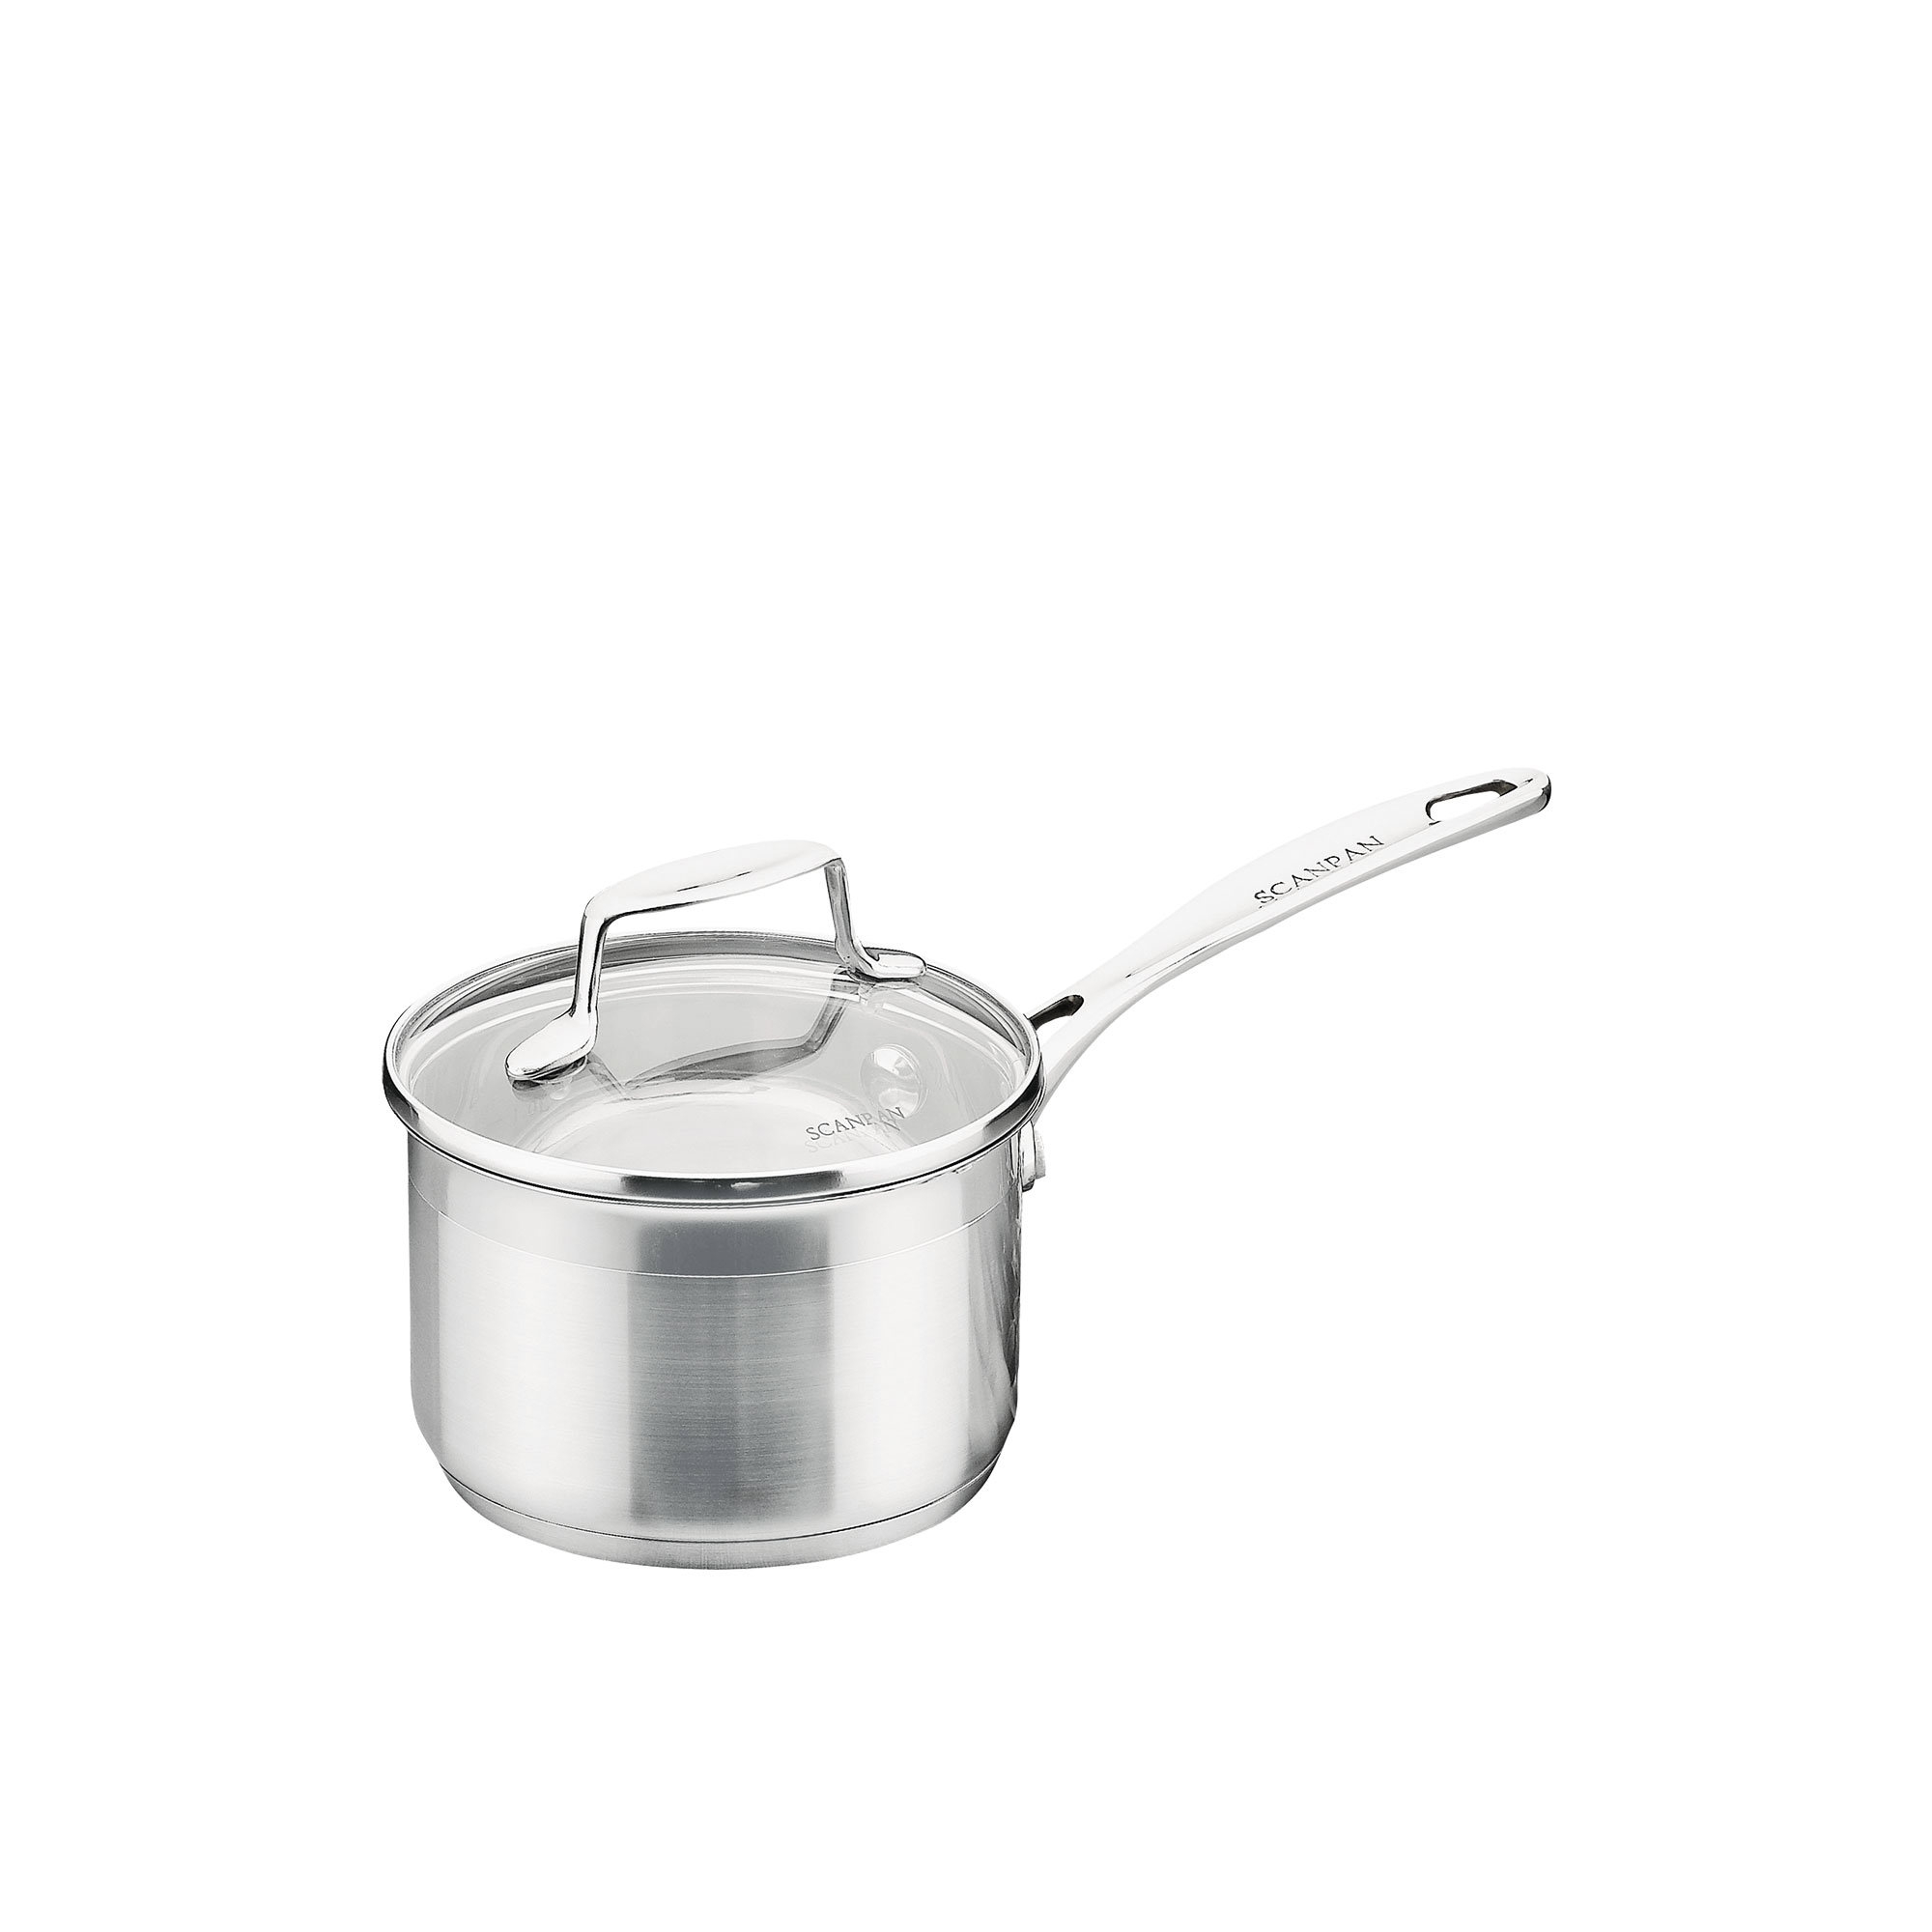 Scanpan Impact Stainless Steel Saucepan with Lid 14cm - 1.2L Image 1